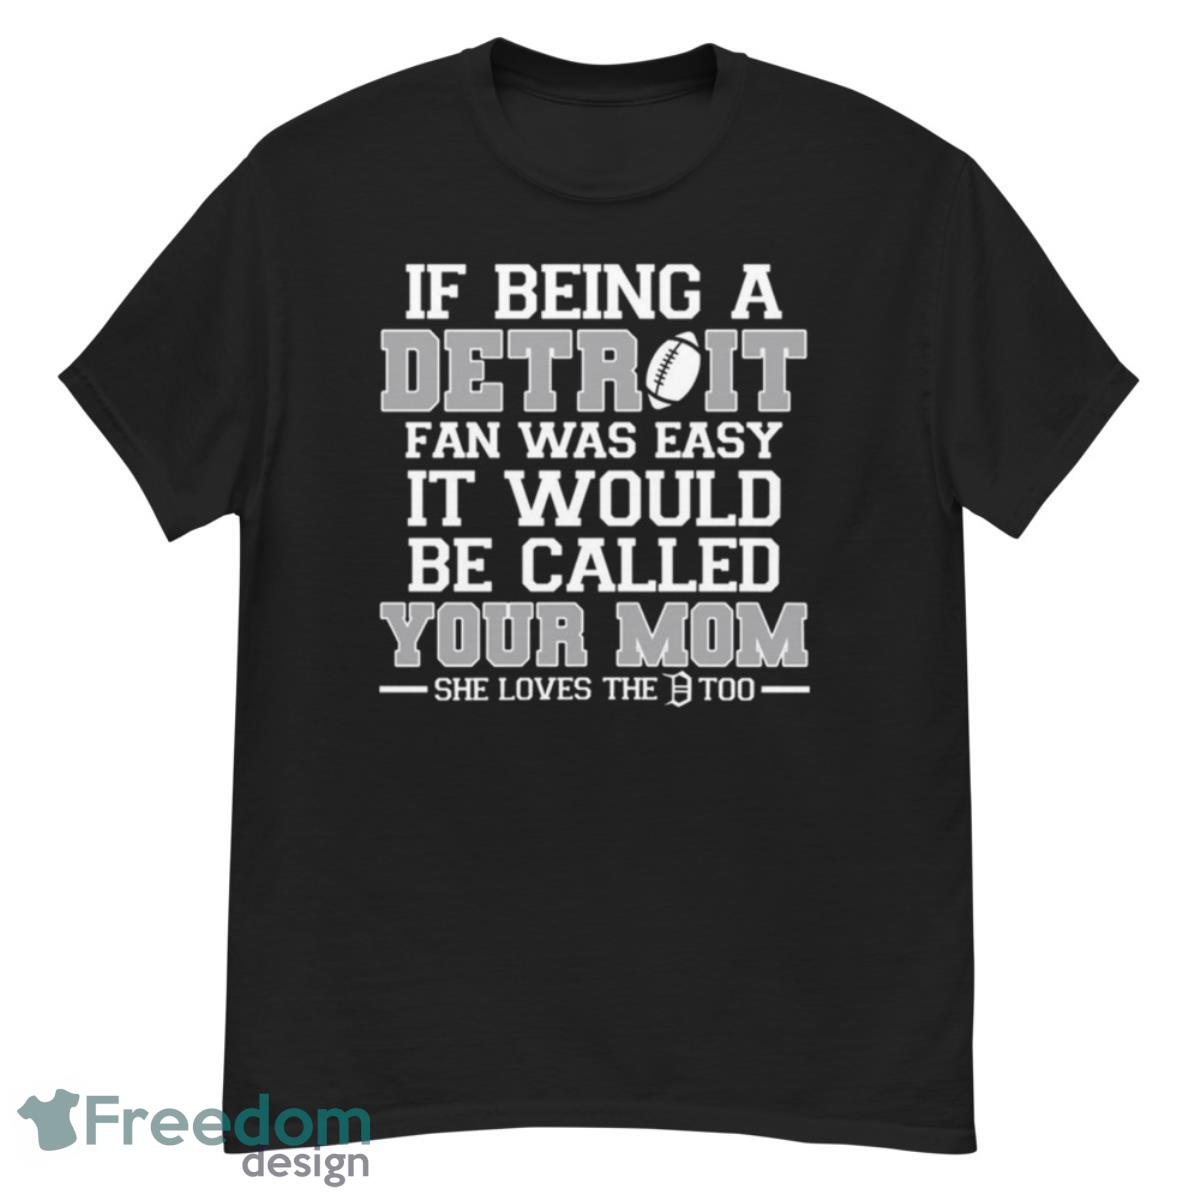 If being a detroit fan was easy it would be called shirt - G500 Men’s Classic T-Shirt